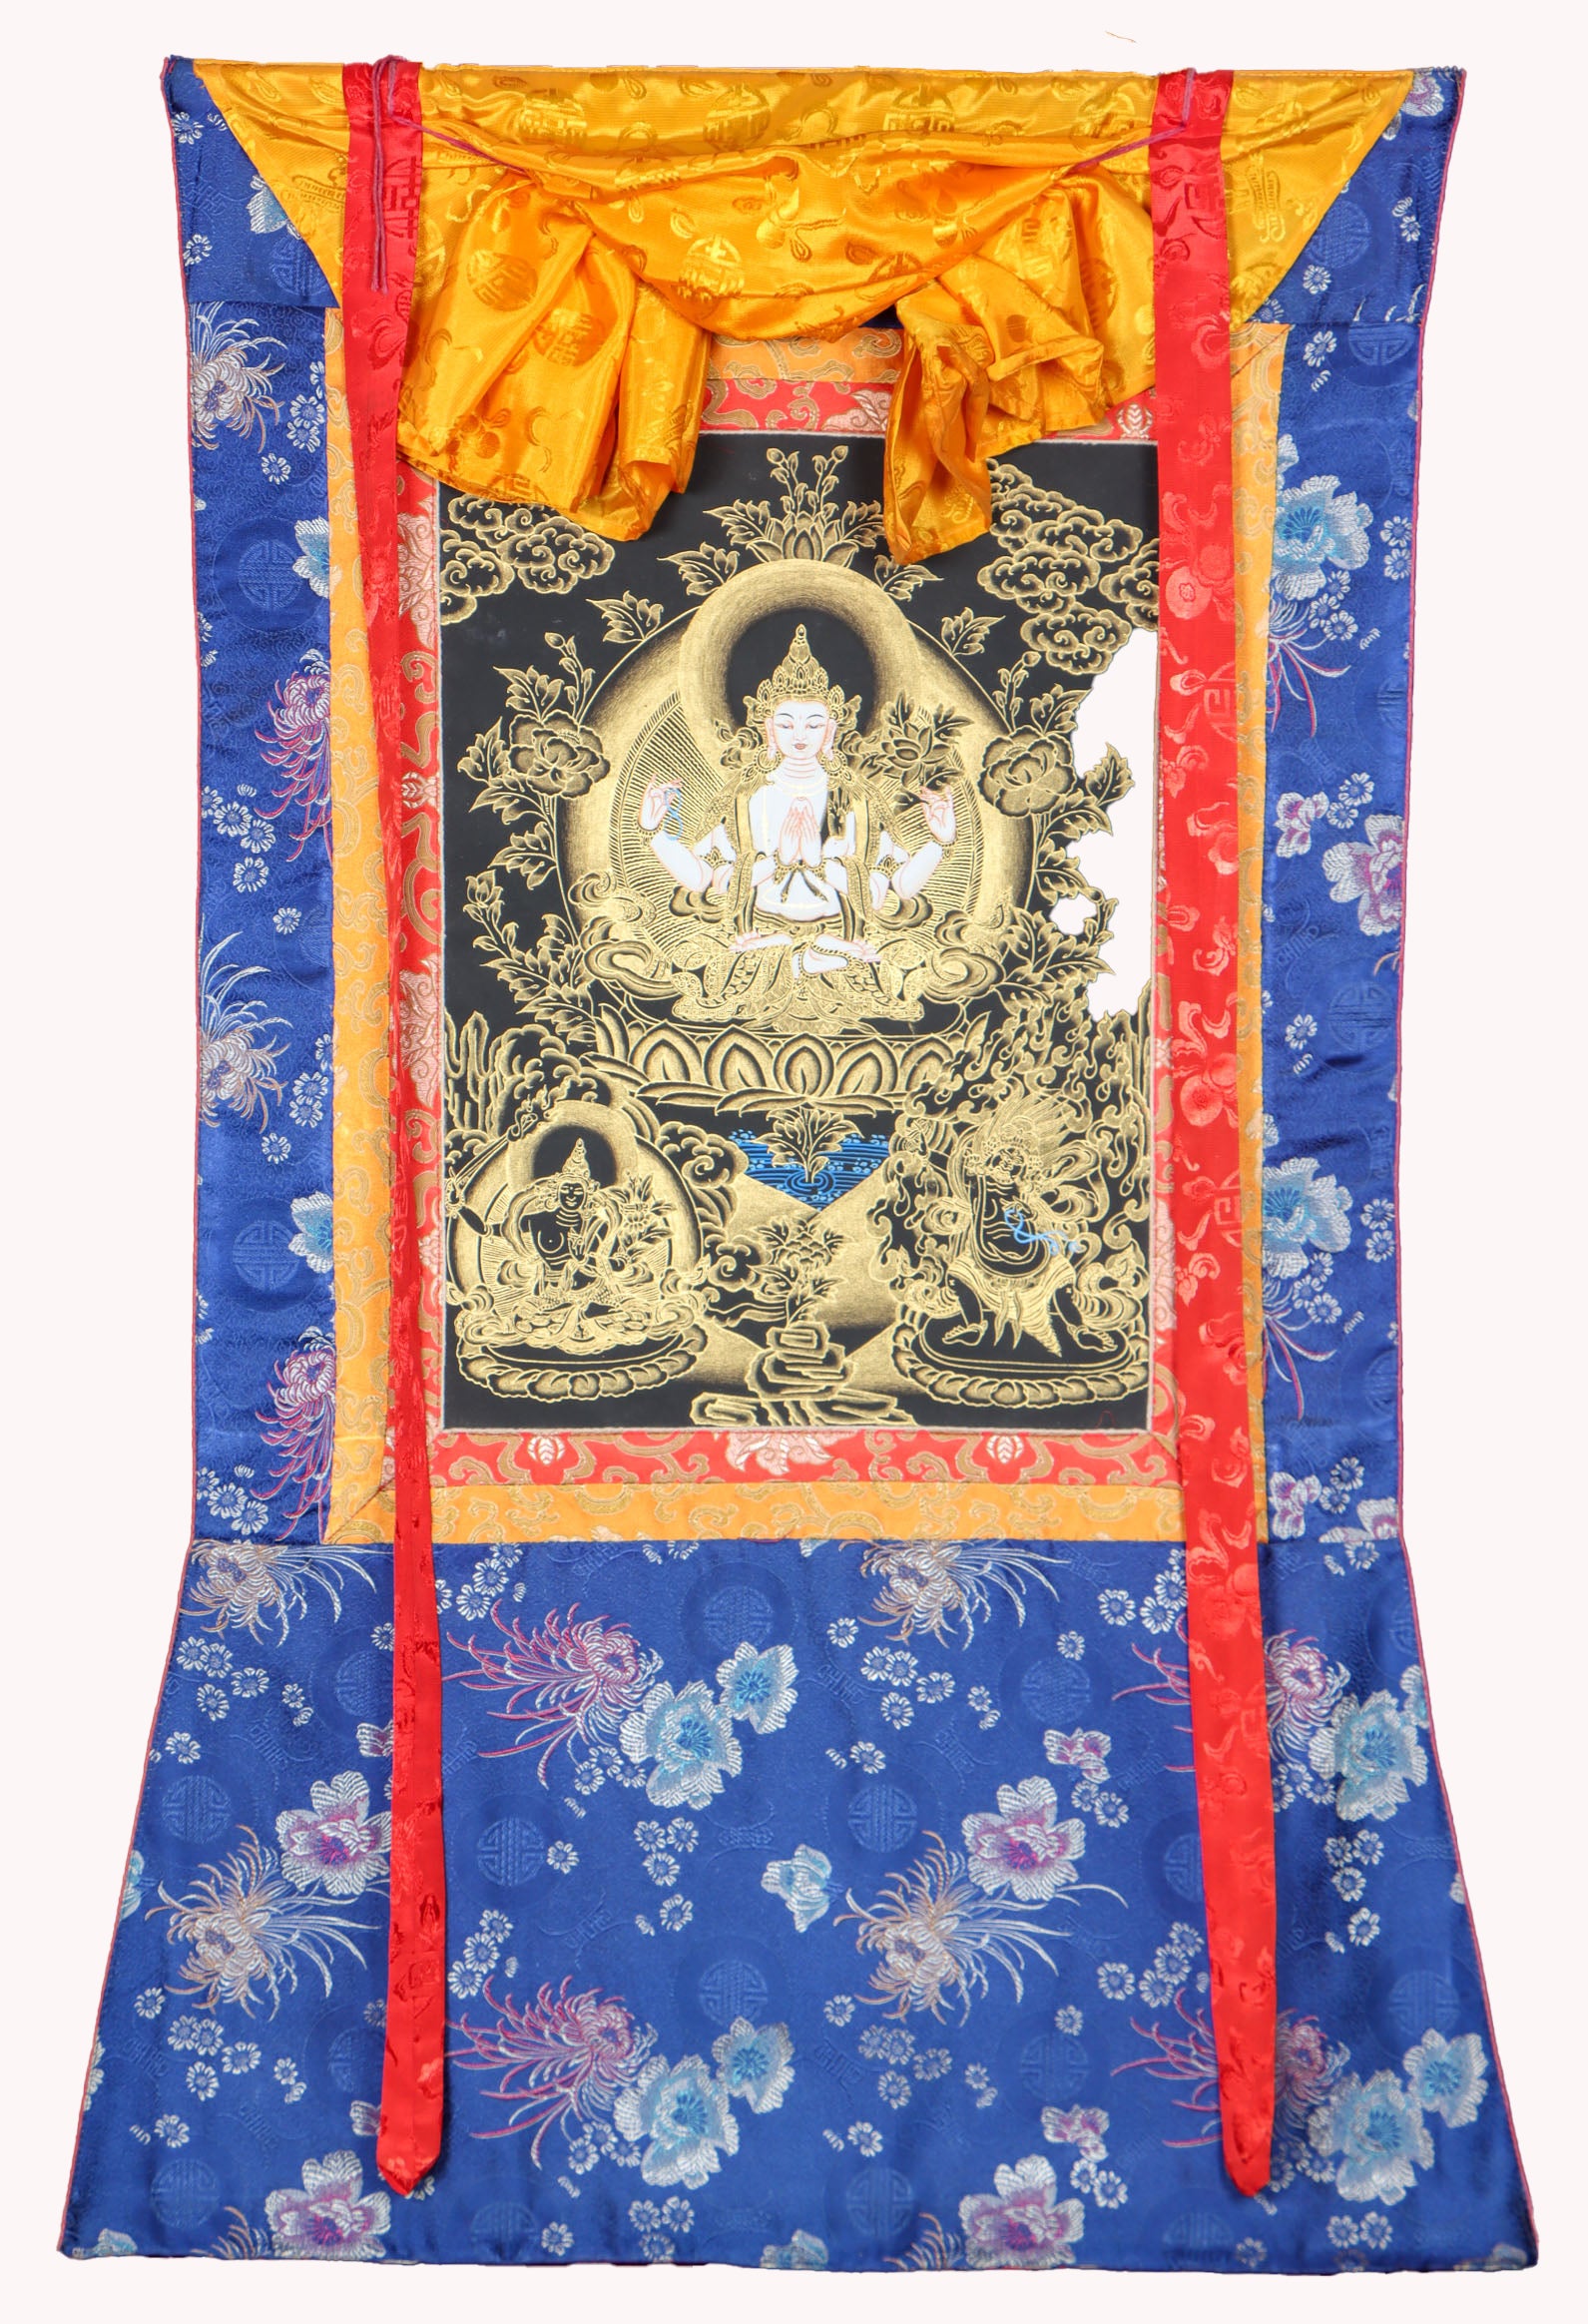 Chengresi Brocade Thangka Painting for wisdom and compassion.